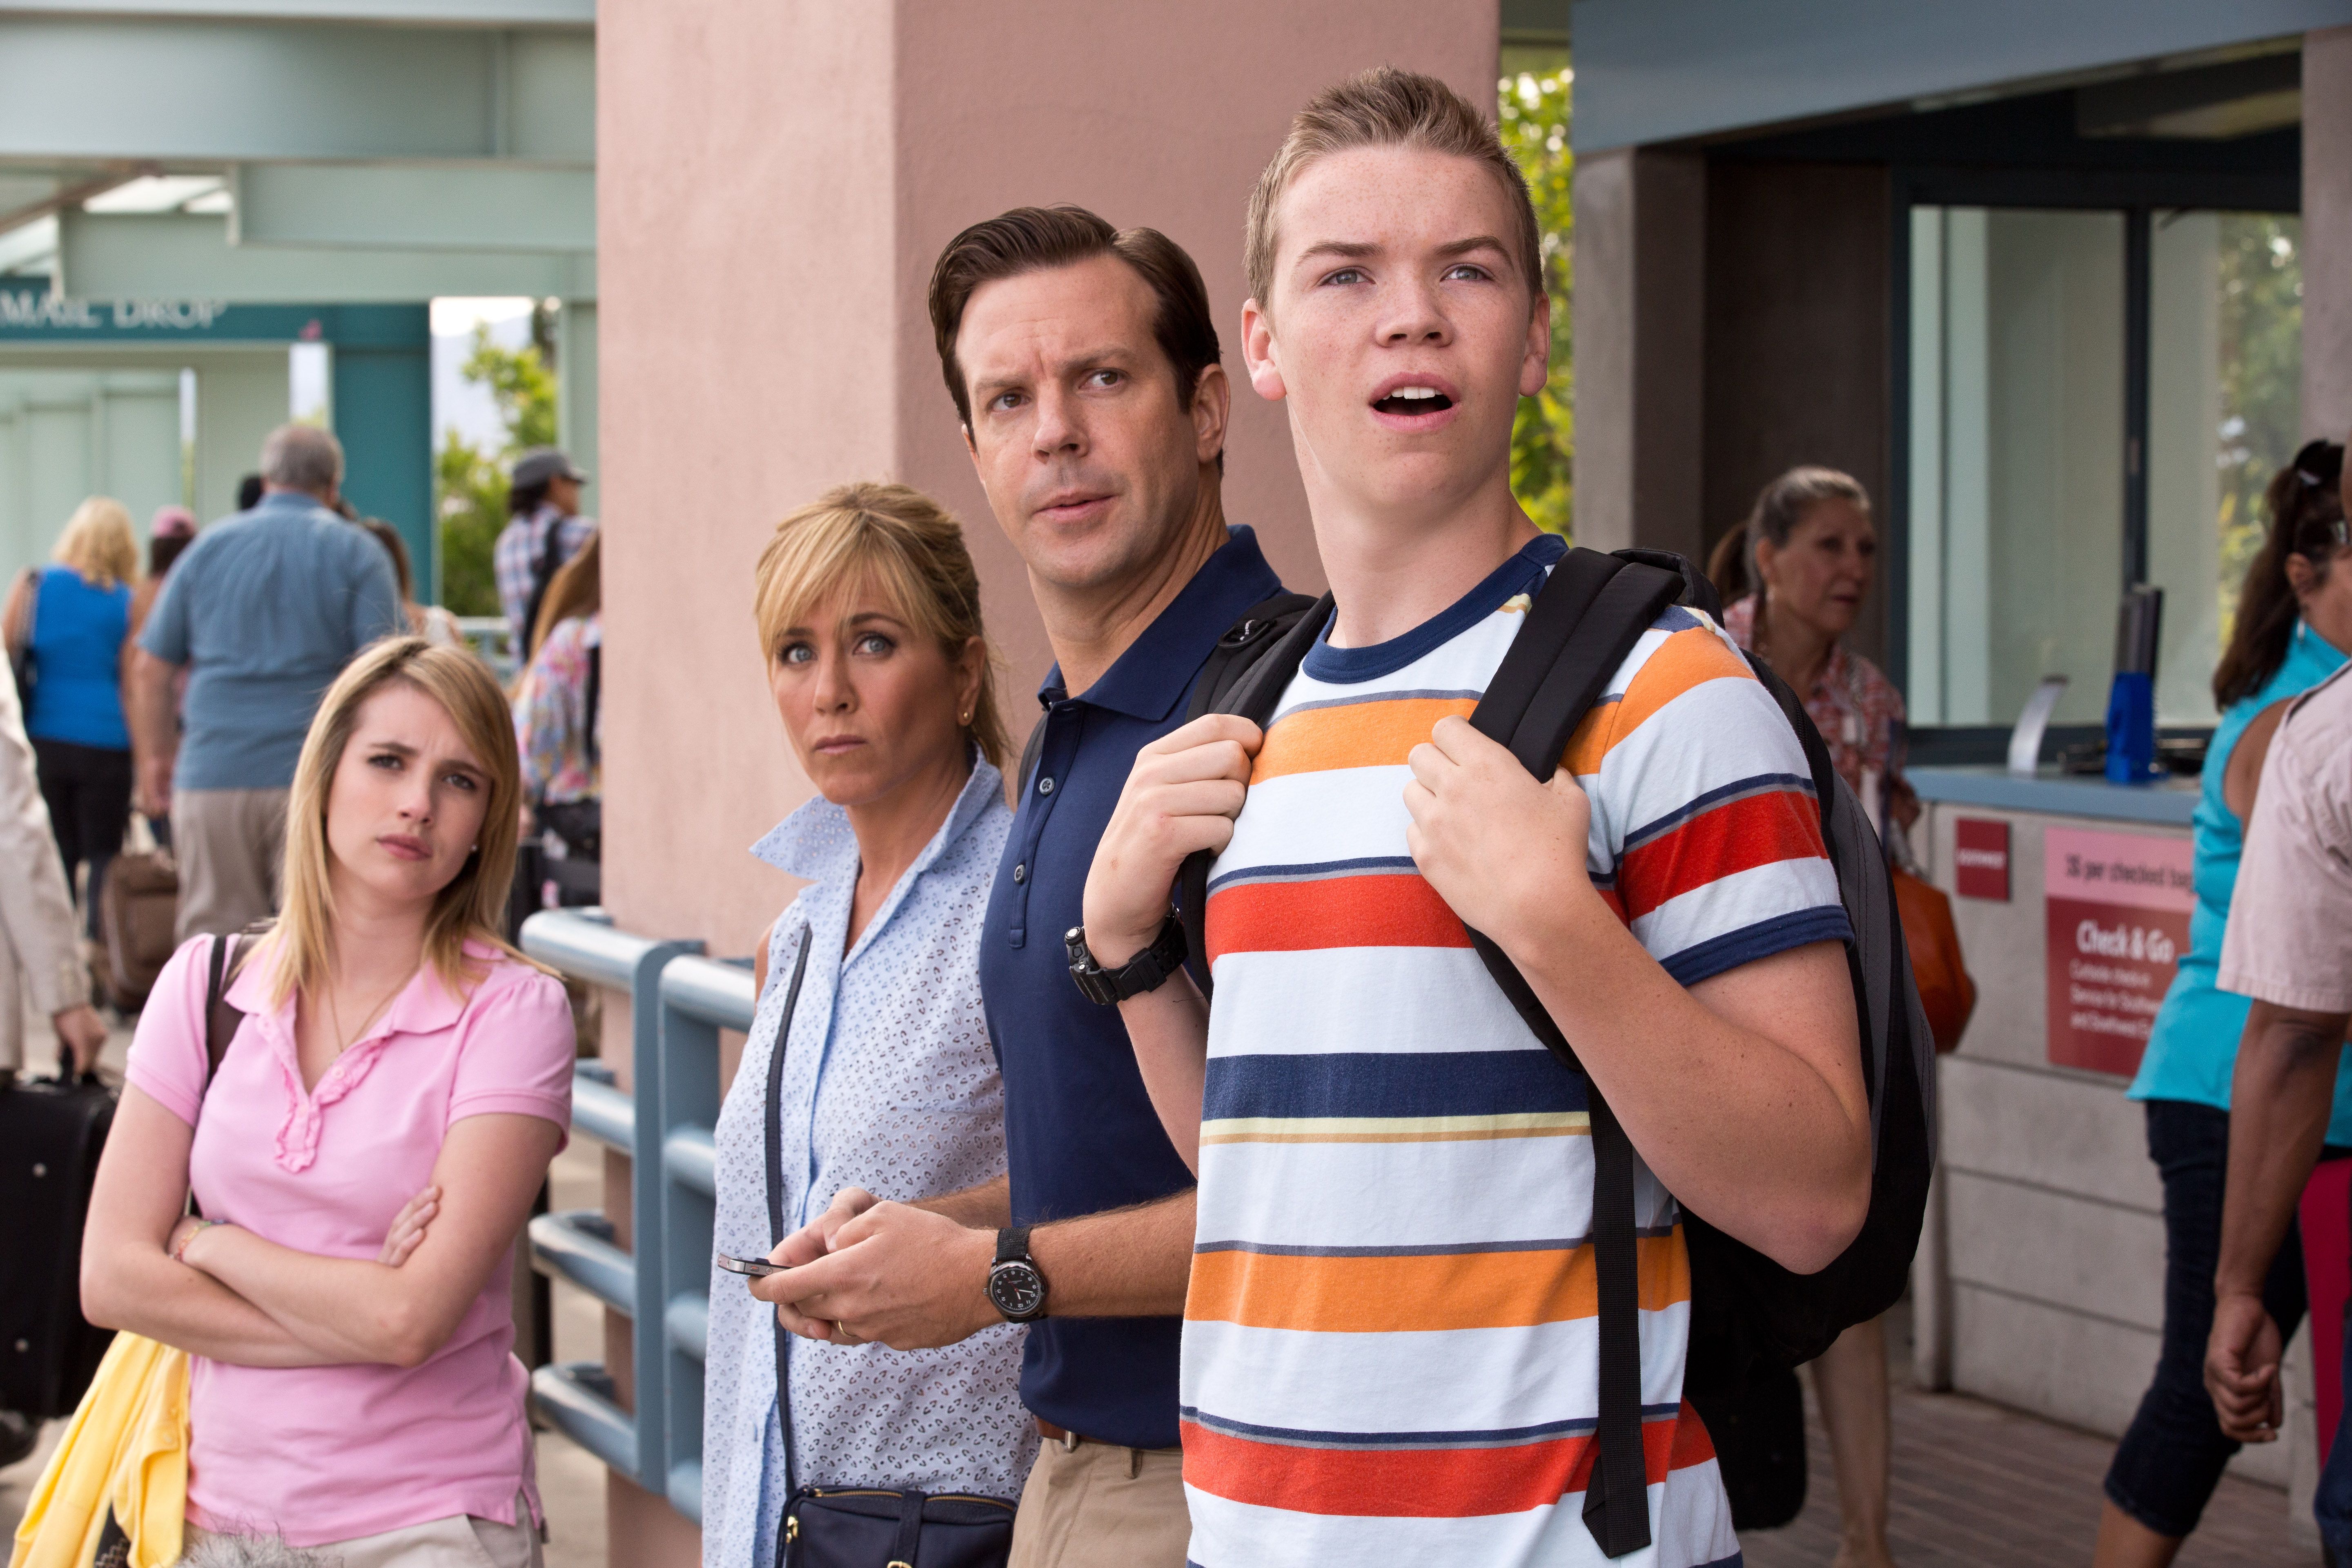 WE'RE THE MILLERS Image. WE'RE THE MILLERS Stars Jason Sudeikis, Jennifer Aniston, and Nick Offerman